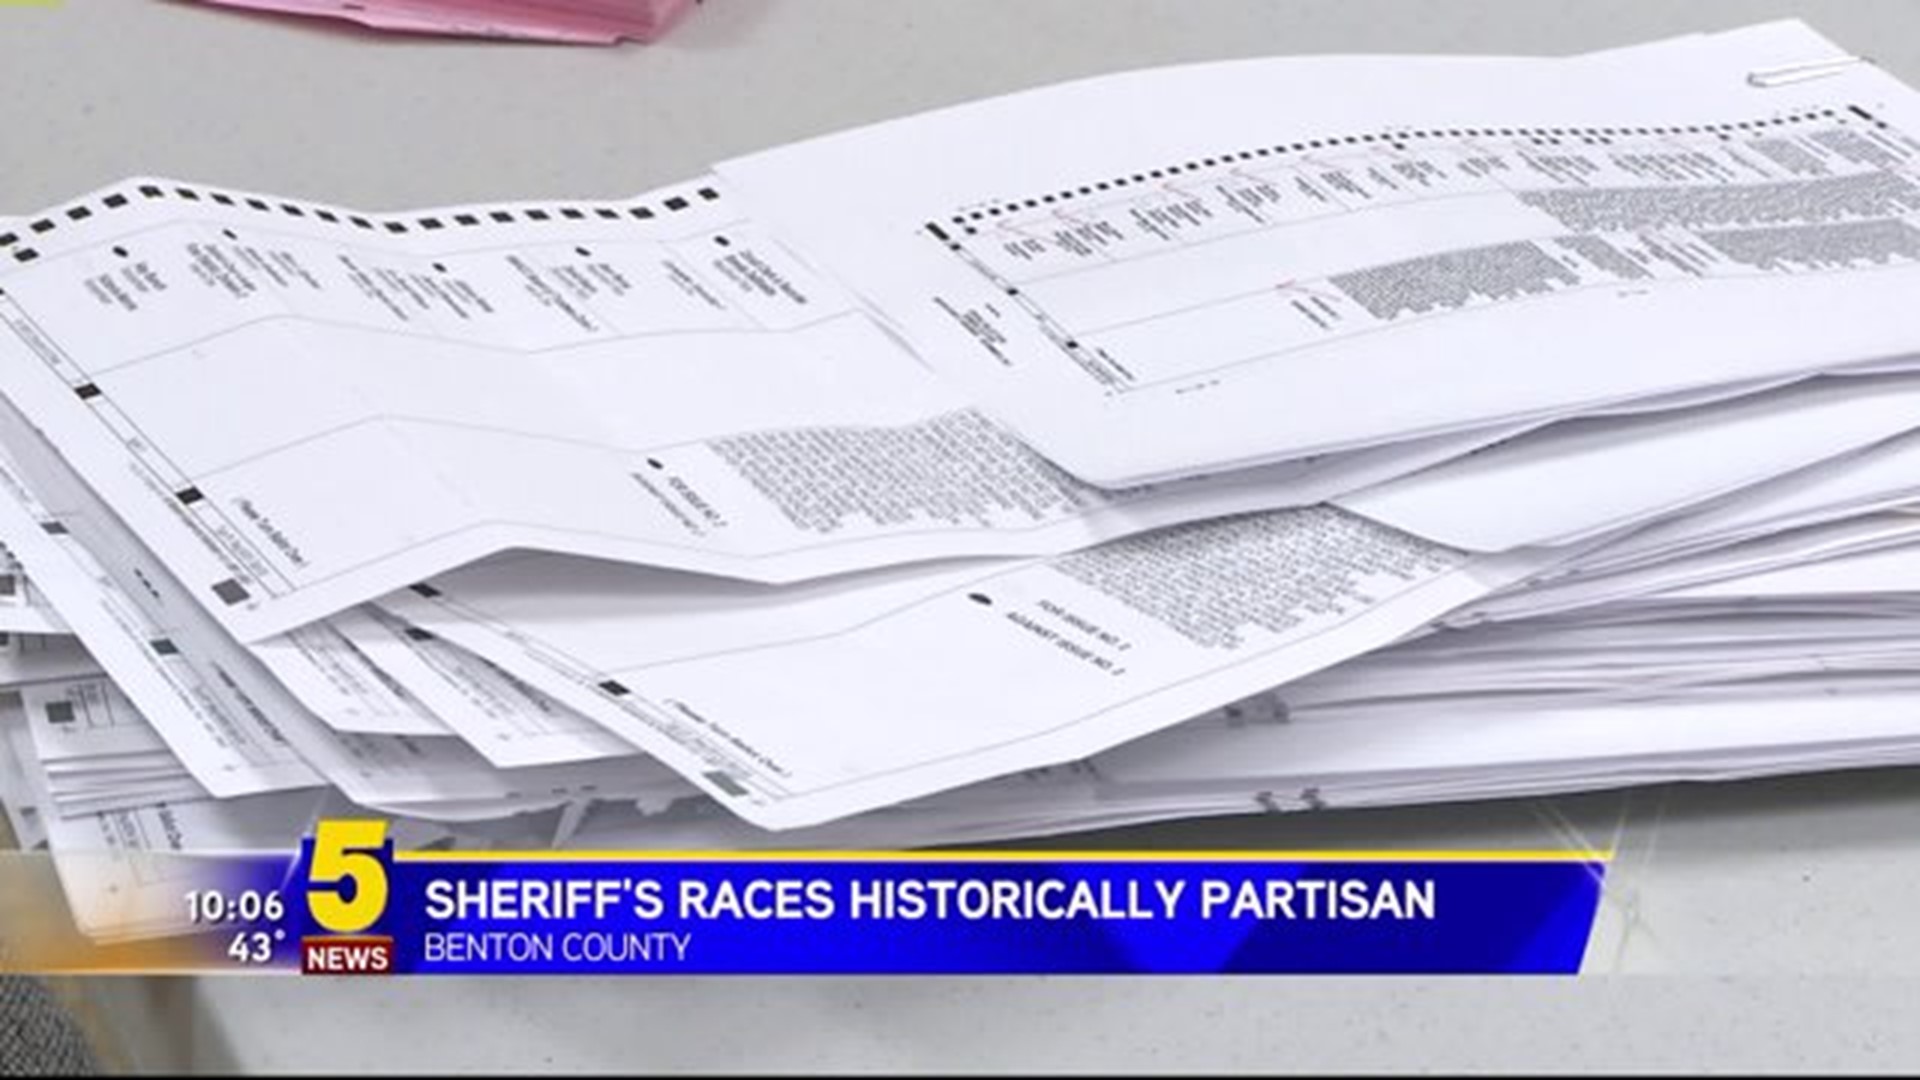 Professor, Independent Candidate Weight In On Partisan Sheriff Races